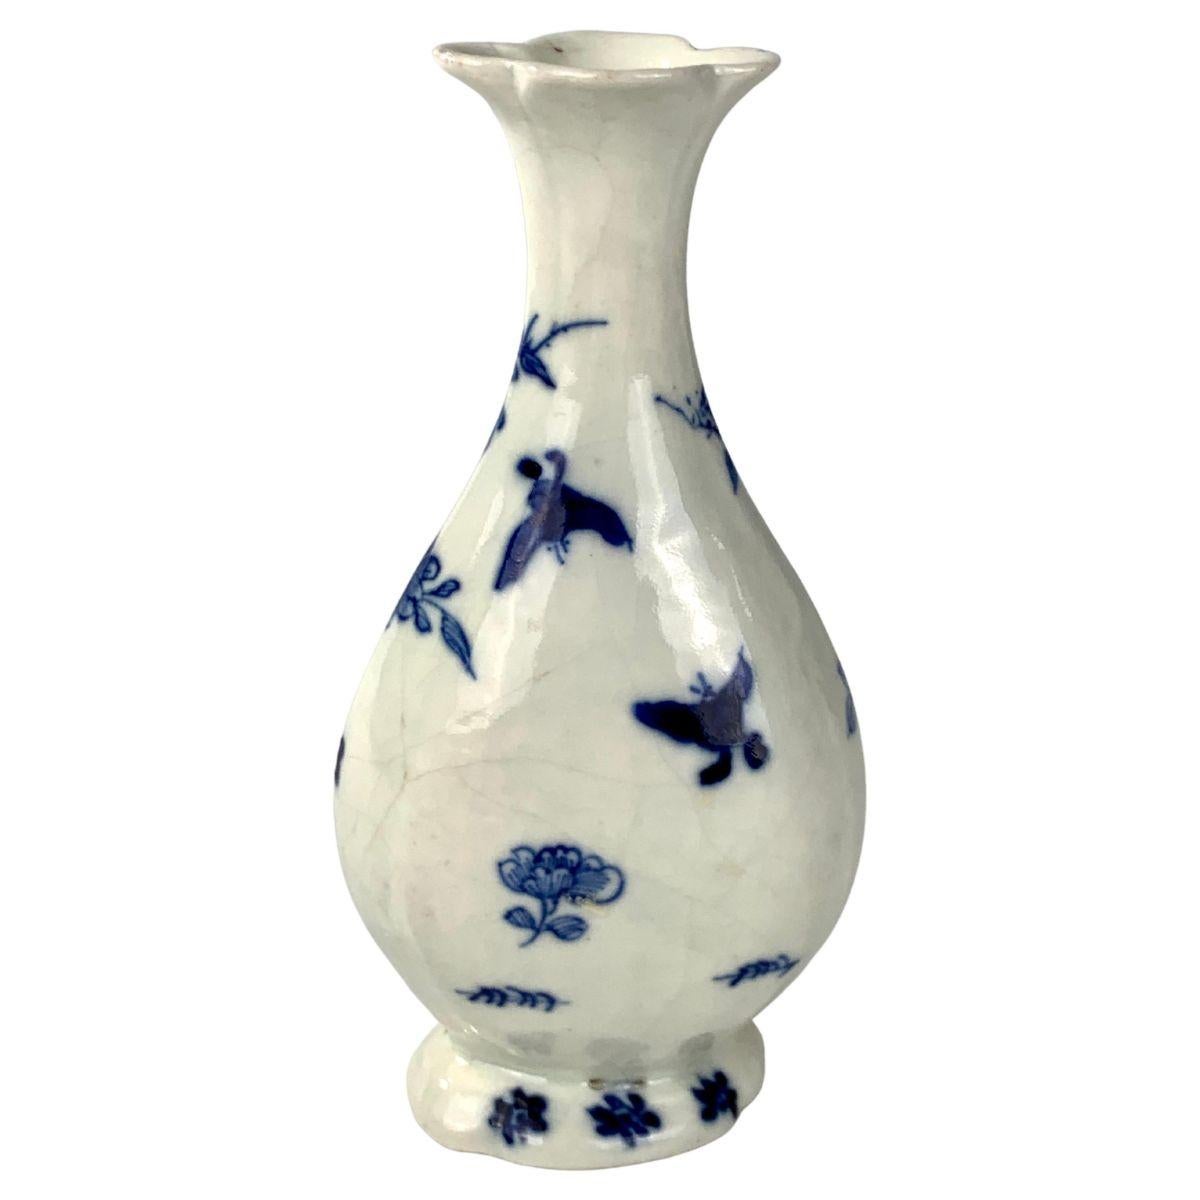 This delicate Chinese blue and white bud vase was made in the early 18th century.
Hand-painted in shades of cobalt blue, it shows peonies emanating from rockwork.
The vase has an elegant, slender form that rises to a flared lotus form rim. It is